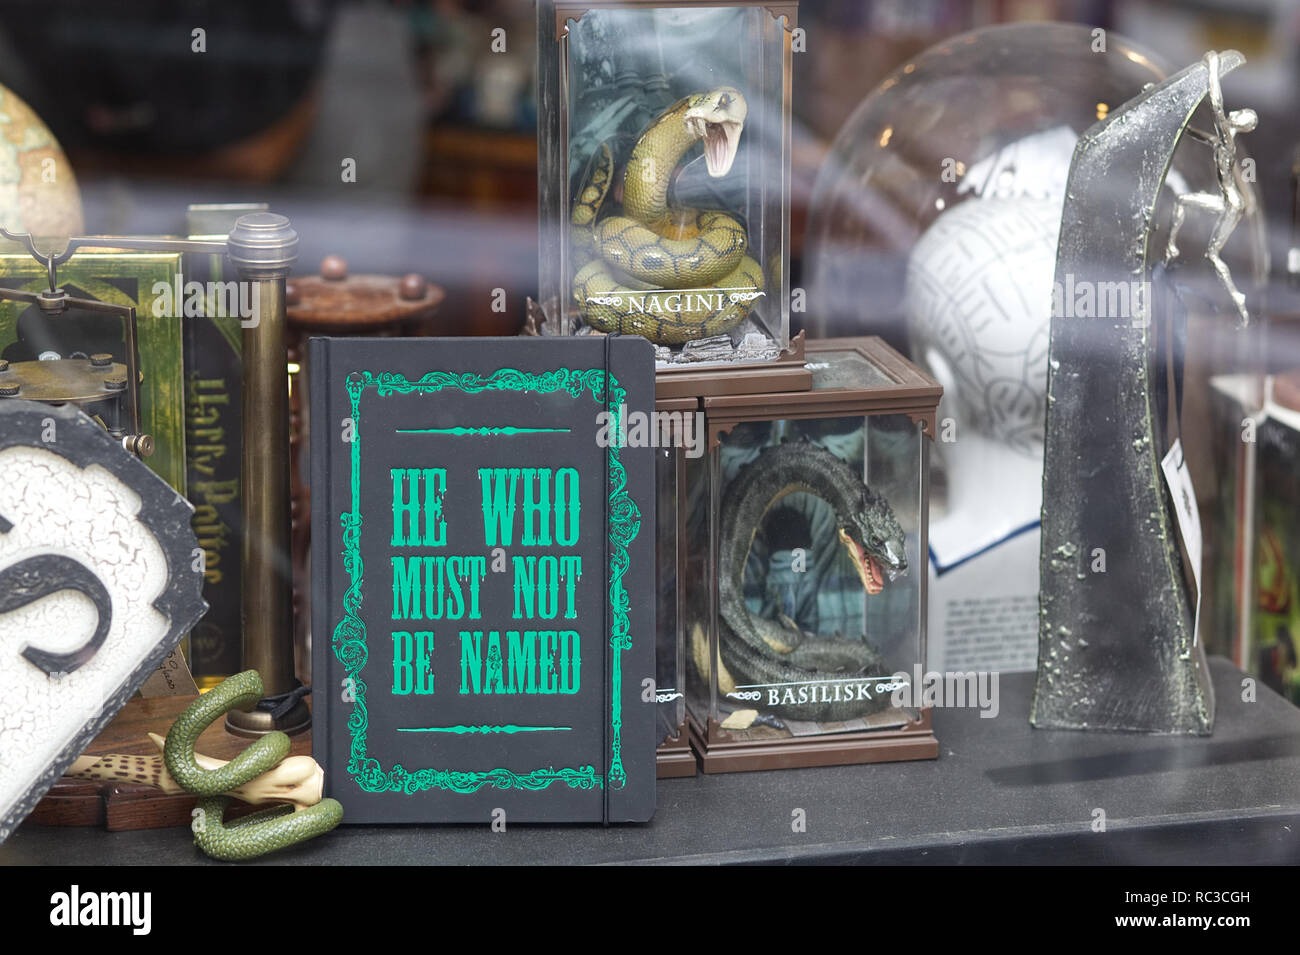 https://c8.alamy.com/comp/RC3CGH/nagini-and-the-basilisk-with-he-who-must-not-be-named-book-from-harry-potter-in-a-shop-window-RC3CGH.jpg